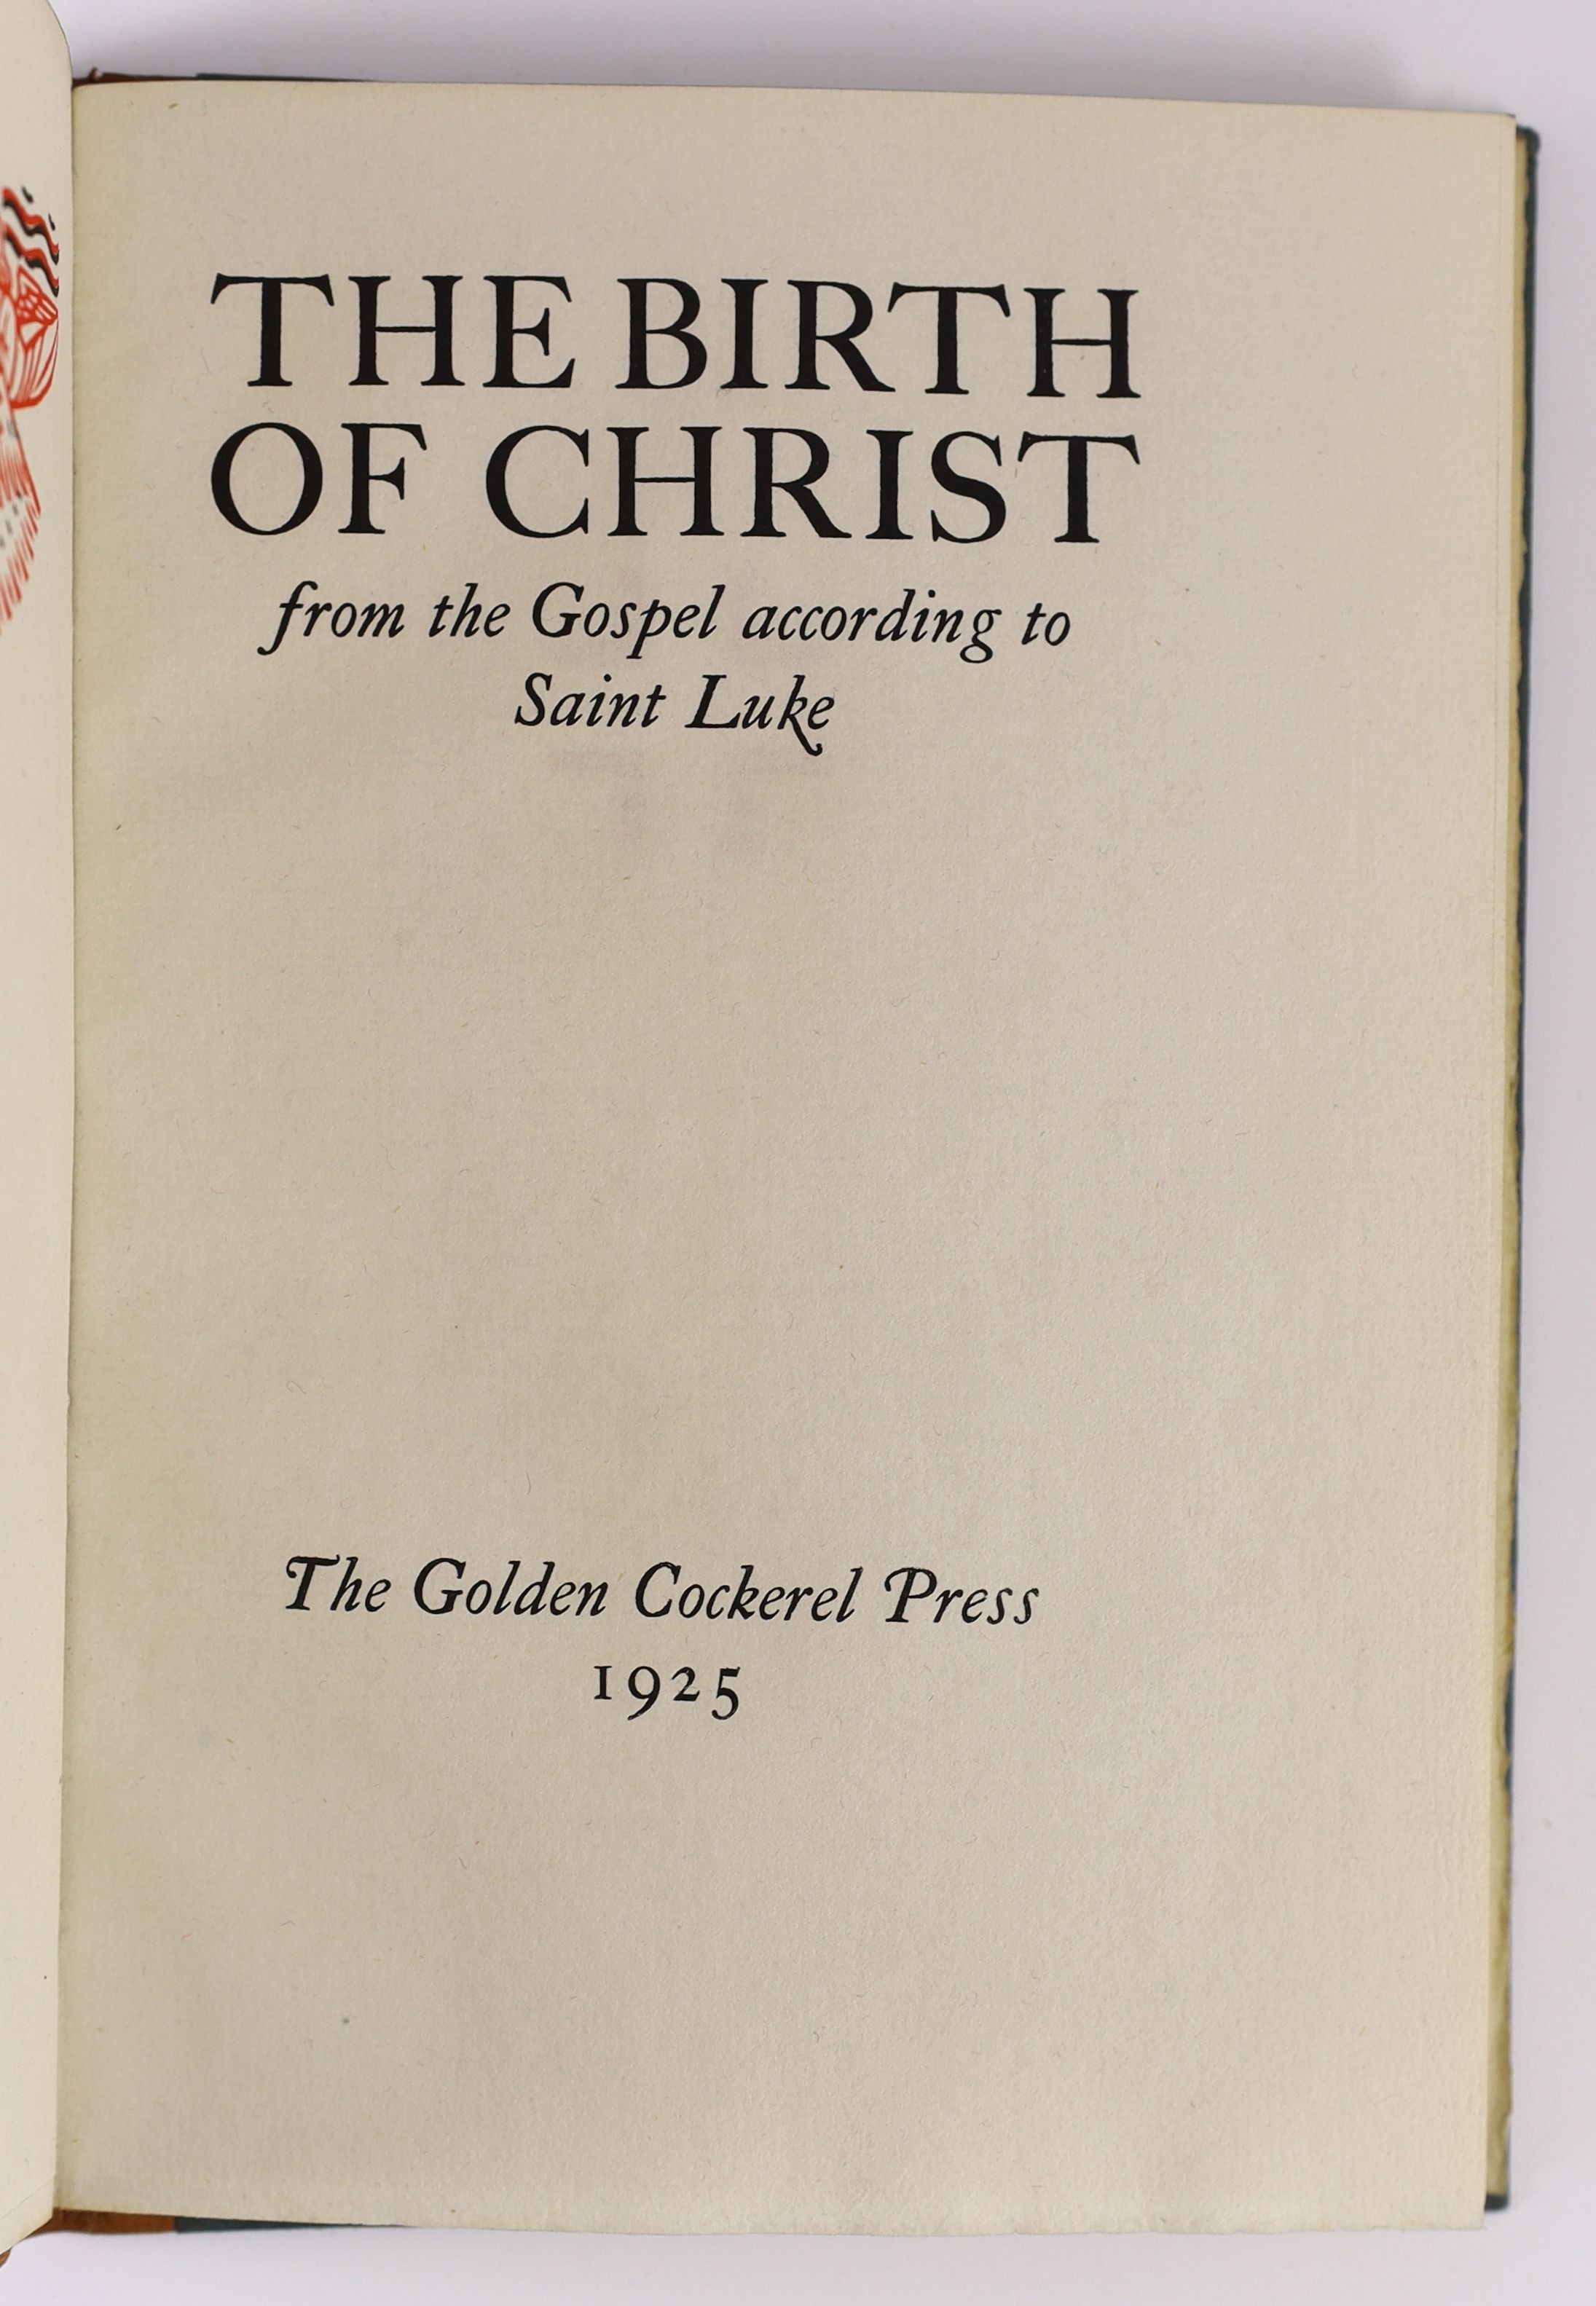 Golden Cockerel Press - The Birth of Christ from the Gospel According to St. Luke, one of 370, with wood-engravings by Neil Rooke, 8vo, quarter calf with blue boards, Waltham Saint Lawrence, 1925